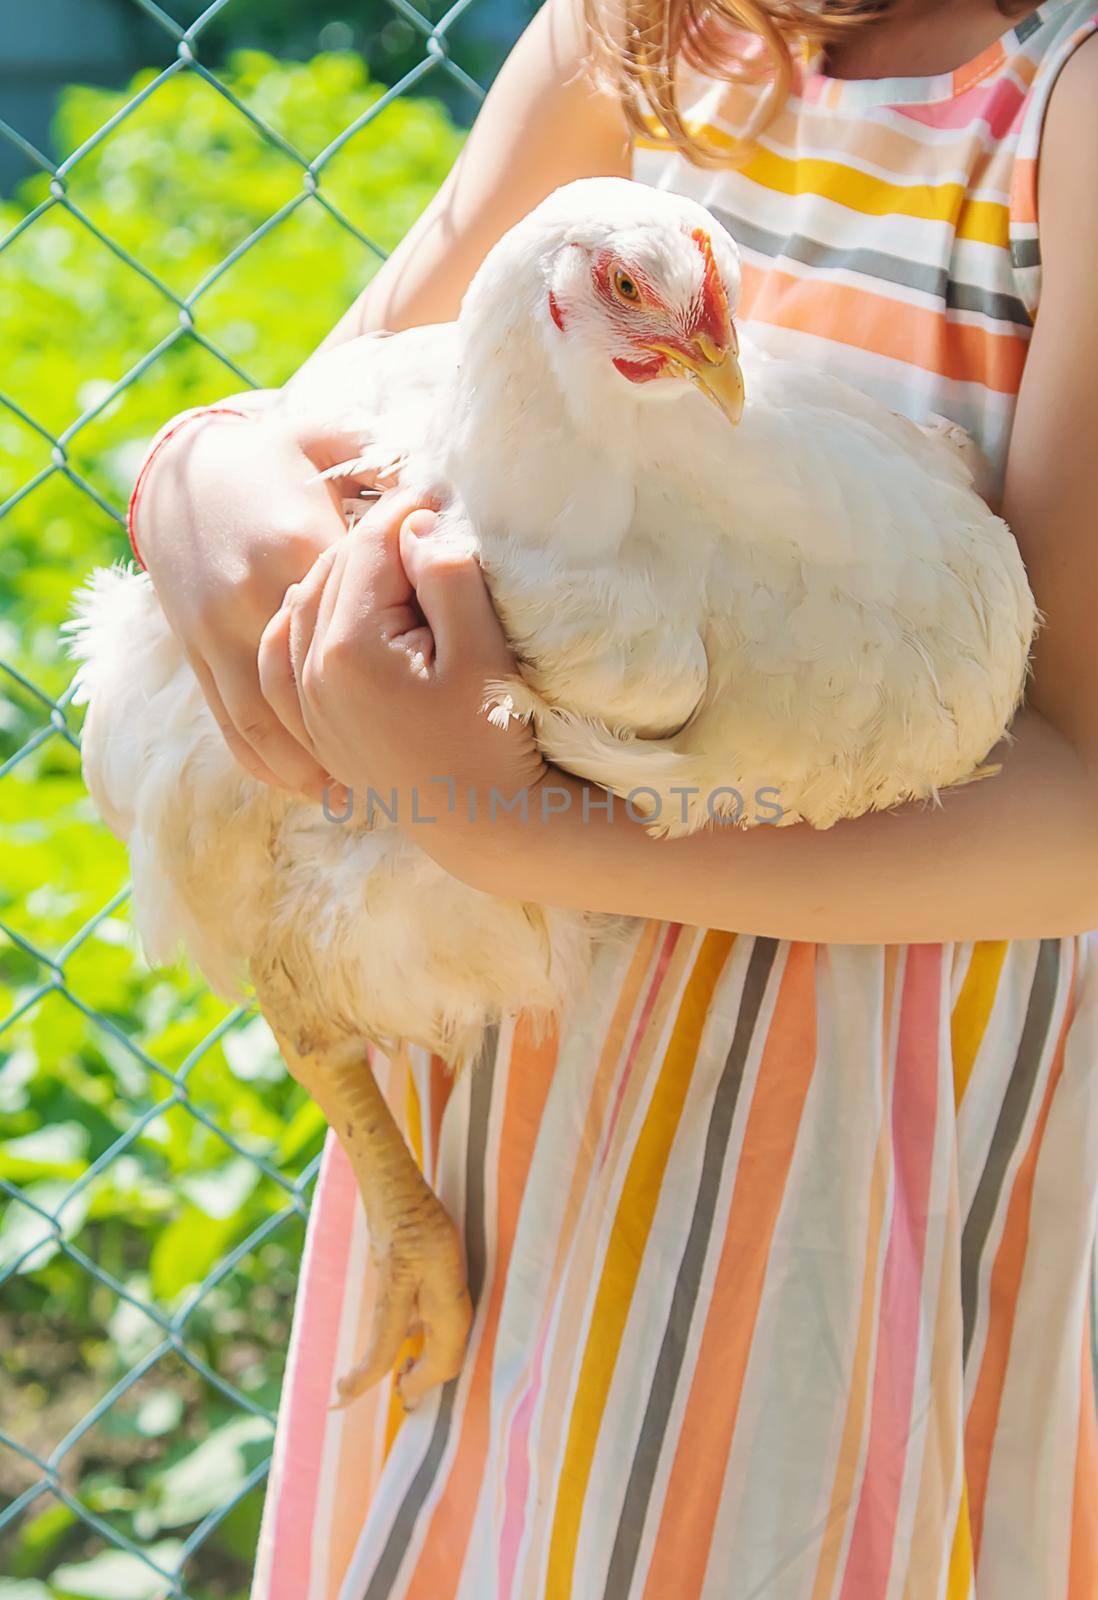 A child on a farm with a chicken. Selective focus.